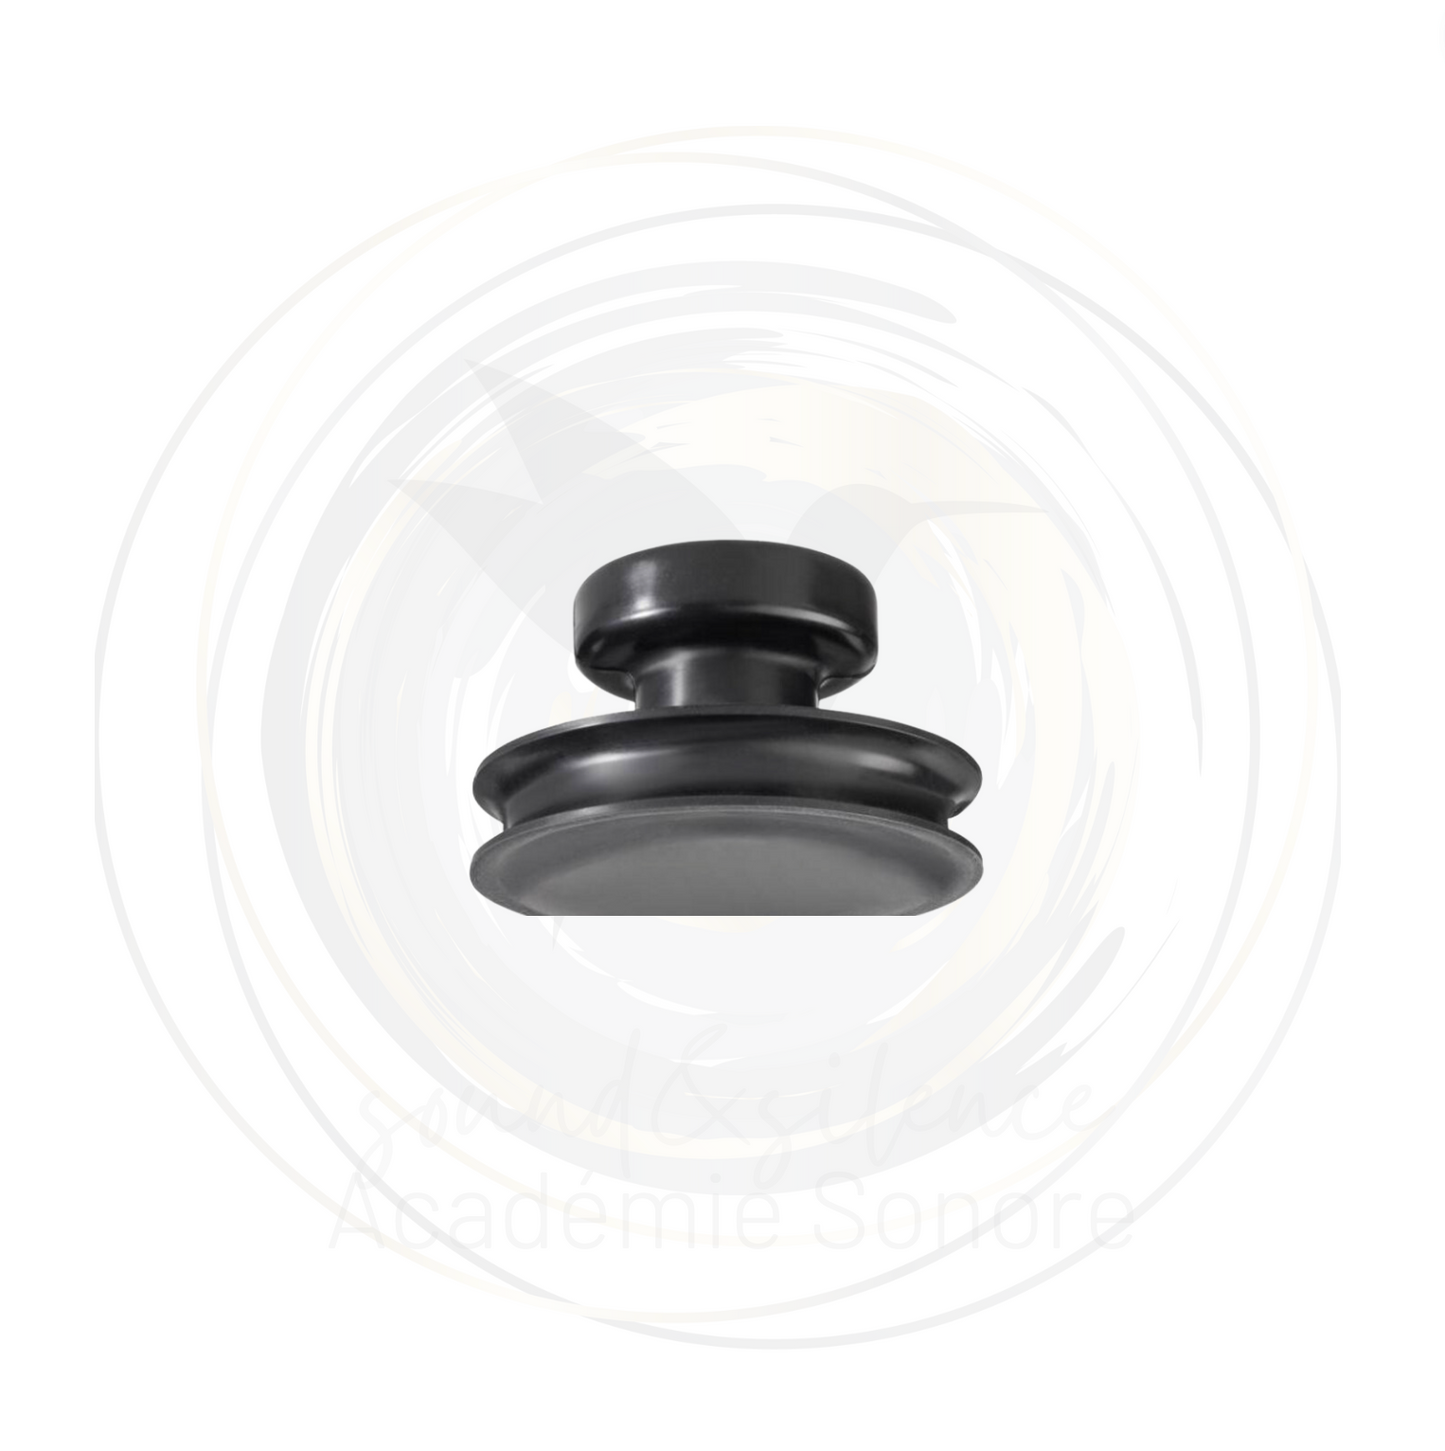 Standard suction cup for medium and large singing bowls